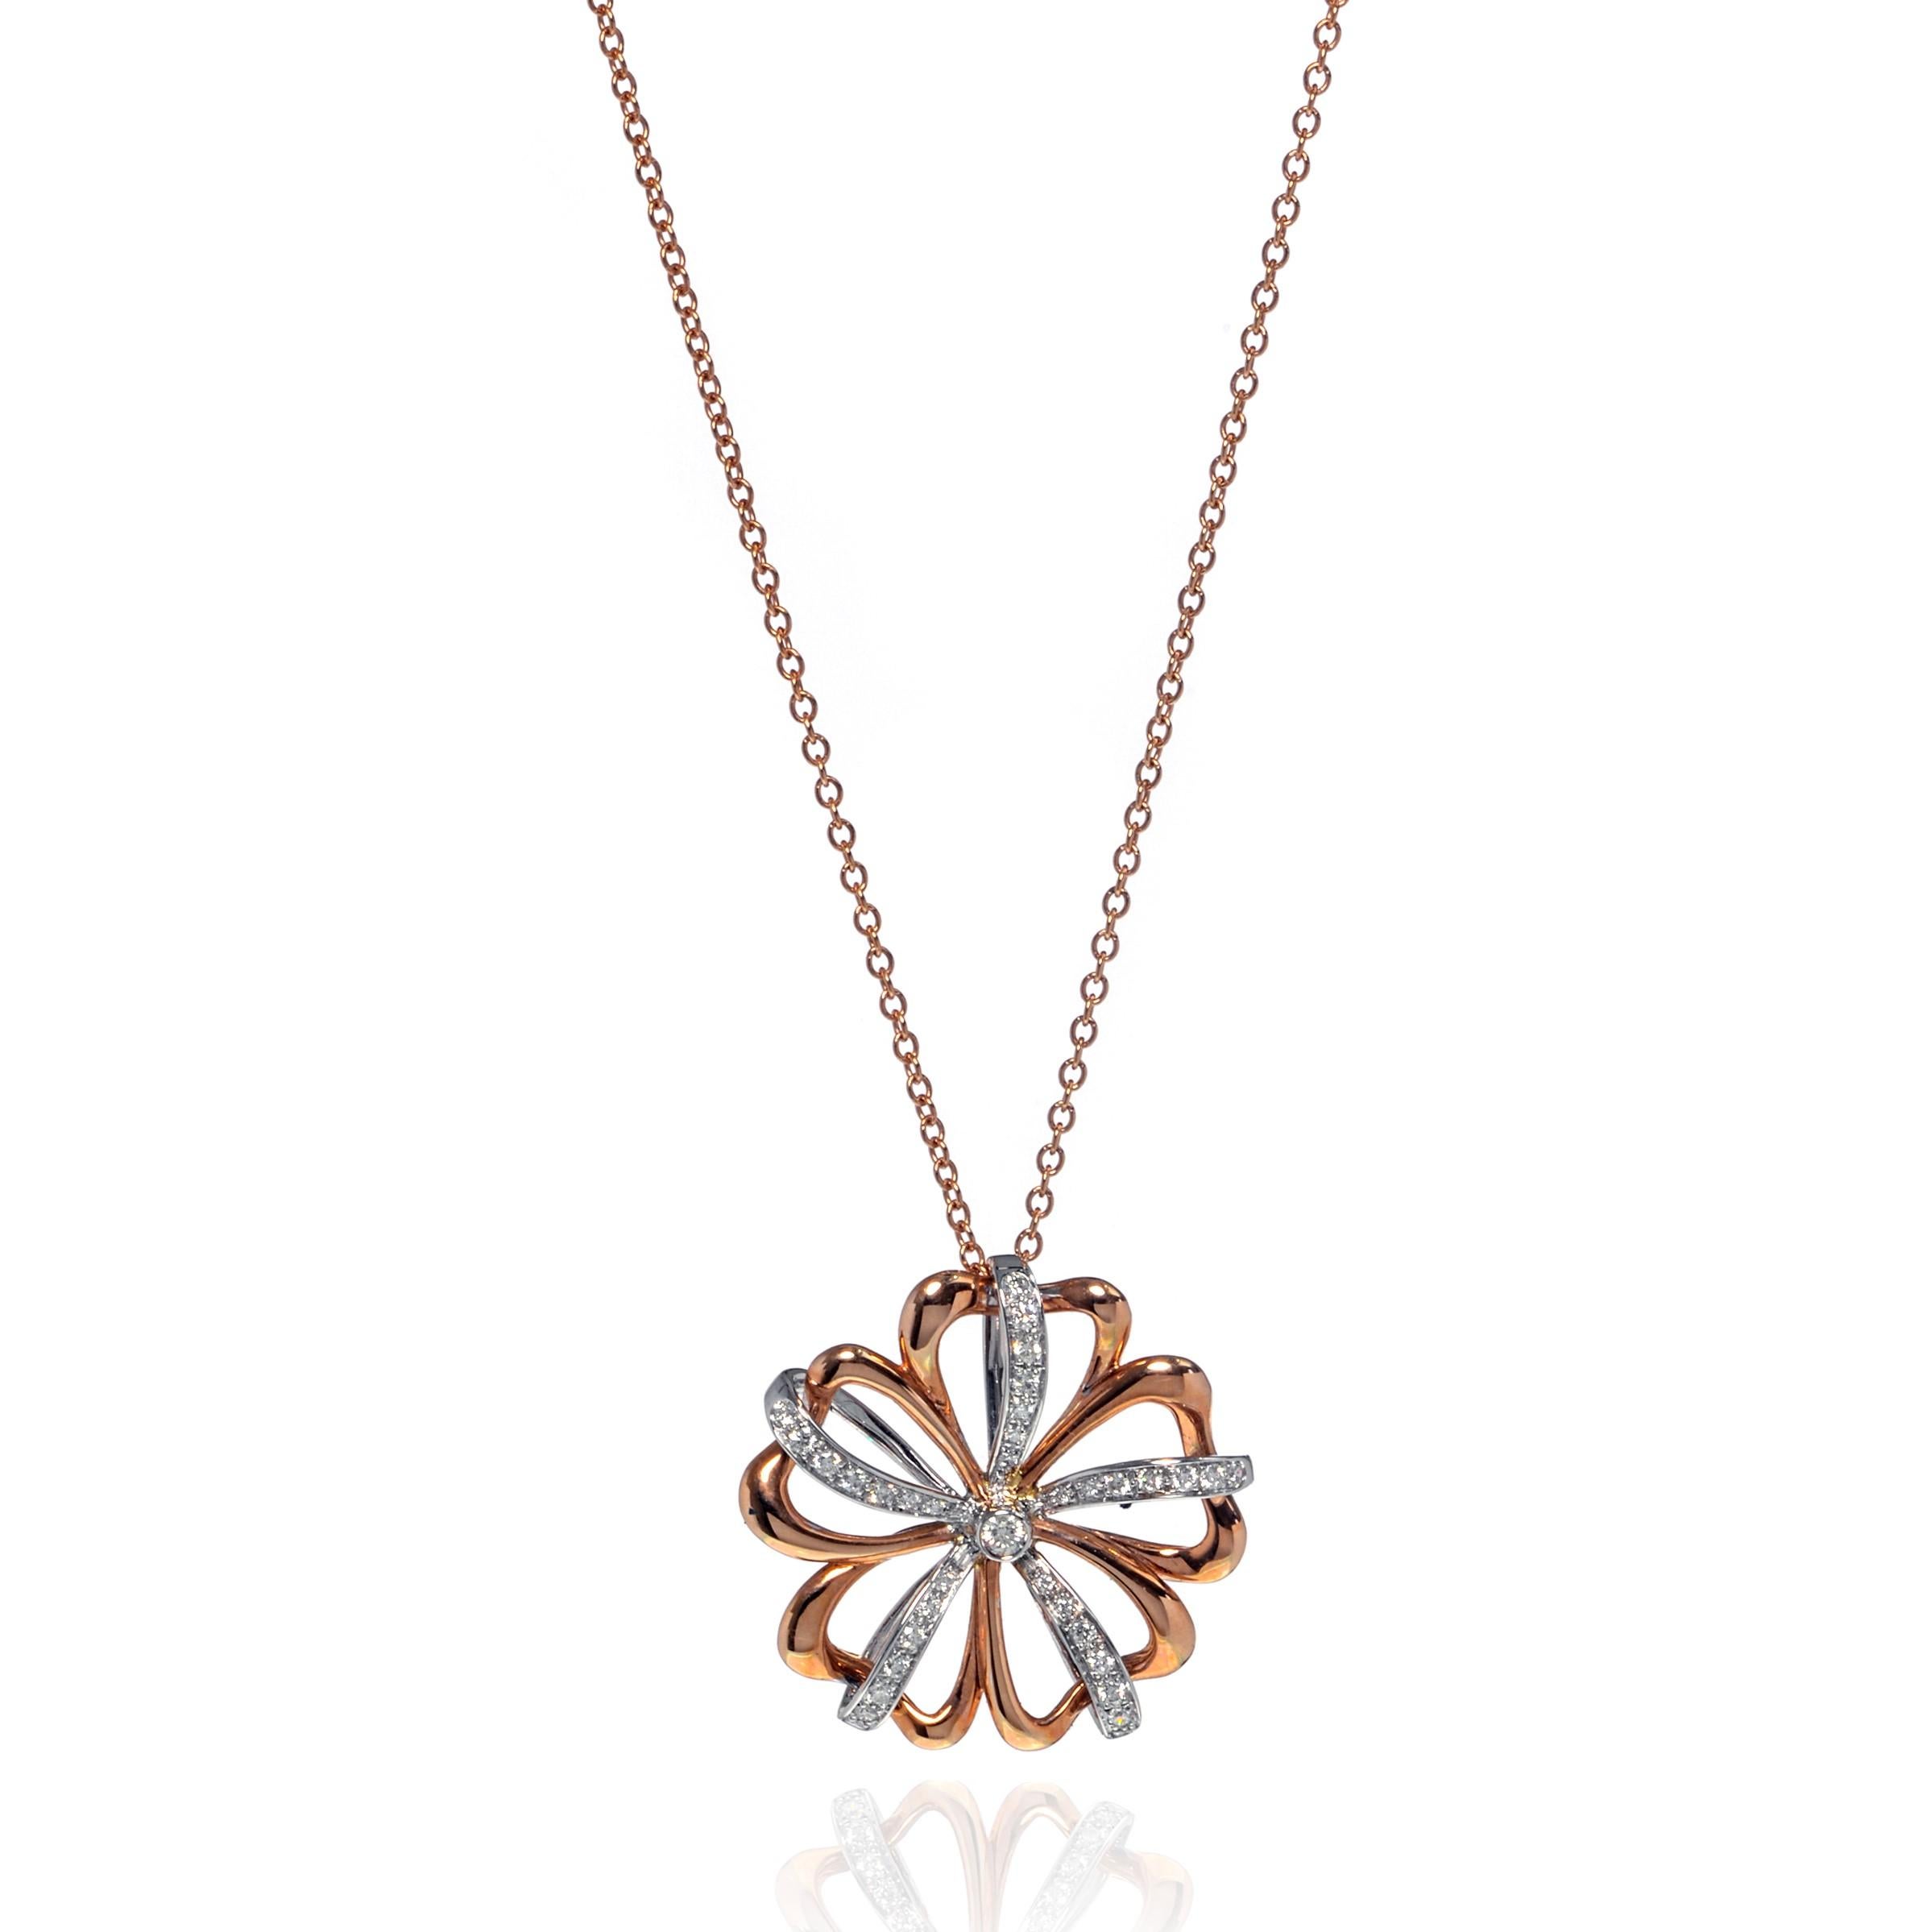 This beautiful Luca Carati 18k rose and white gold pendant necklace features a gorgeous display of diamonds 0.39cttw with a flower shaped design. An 18k white gold floral setting overlaid on an airy rose gold floral setting with a beautiful 18k rose